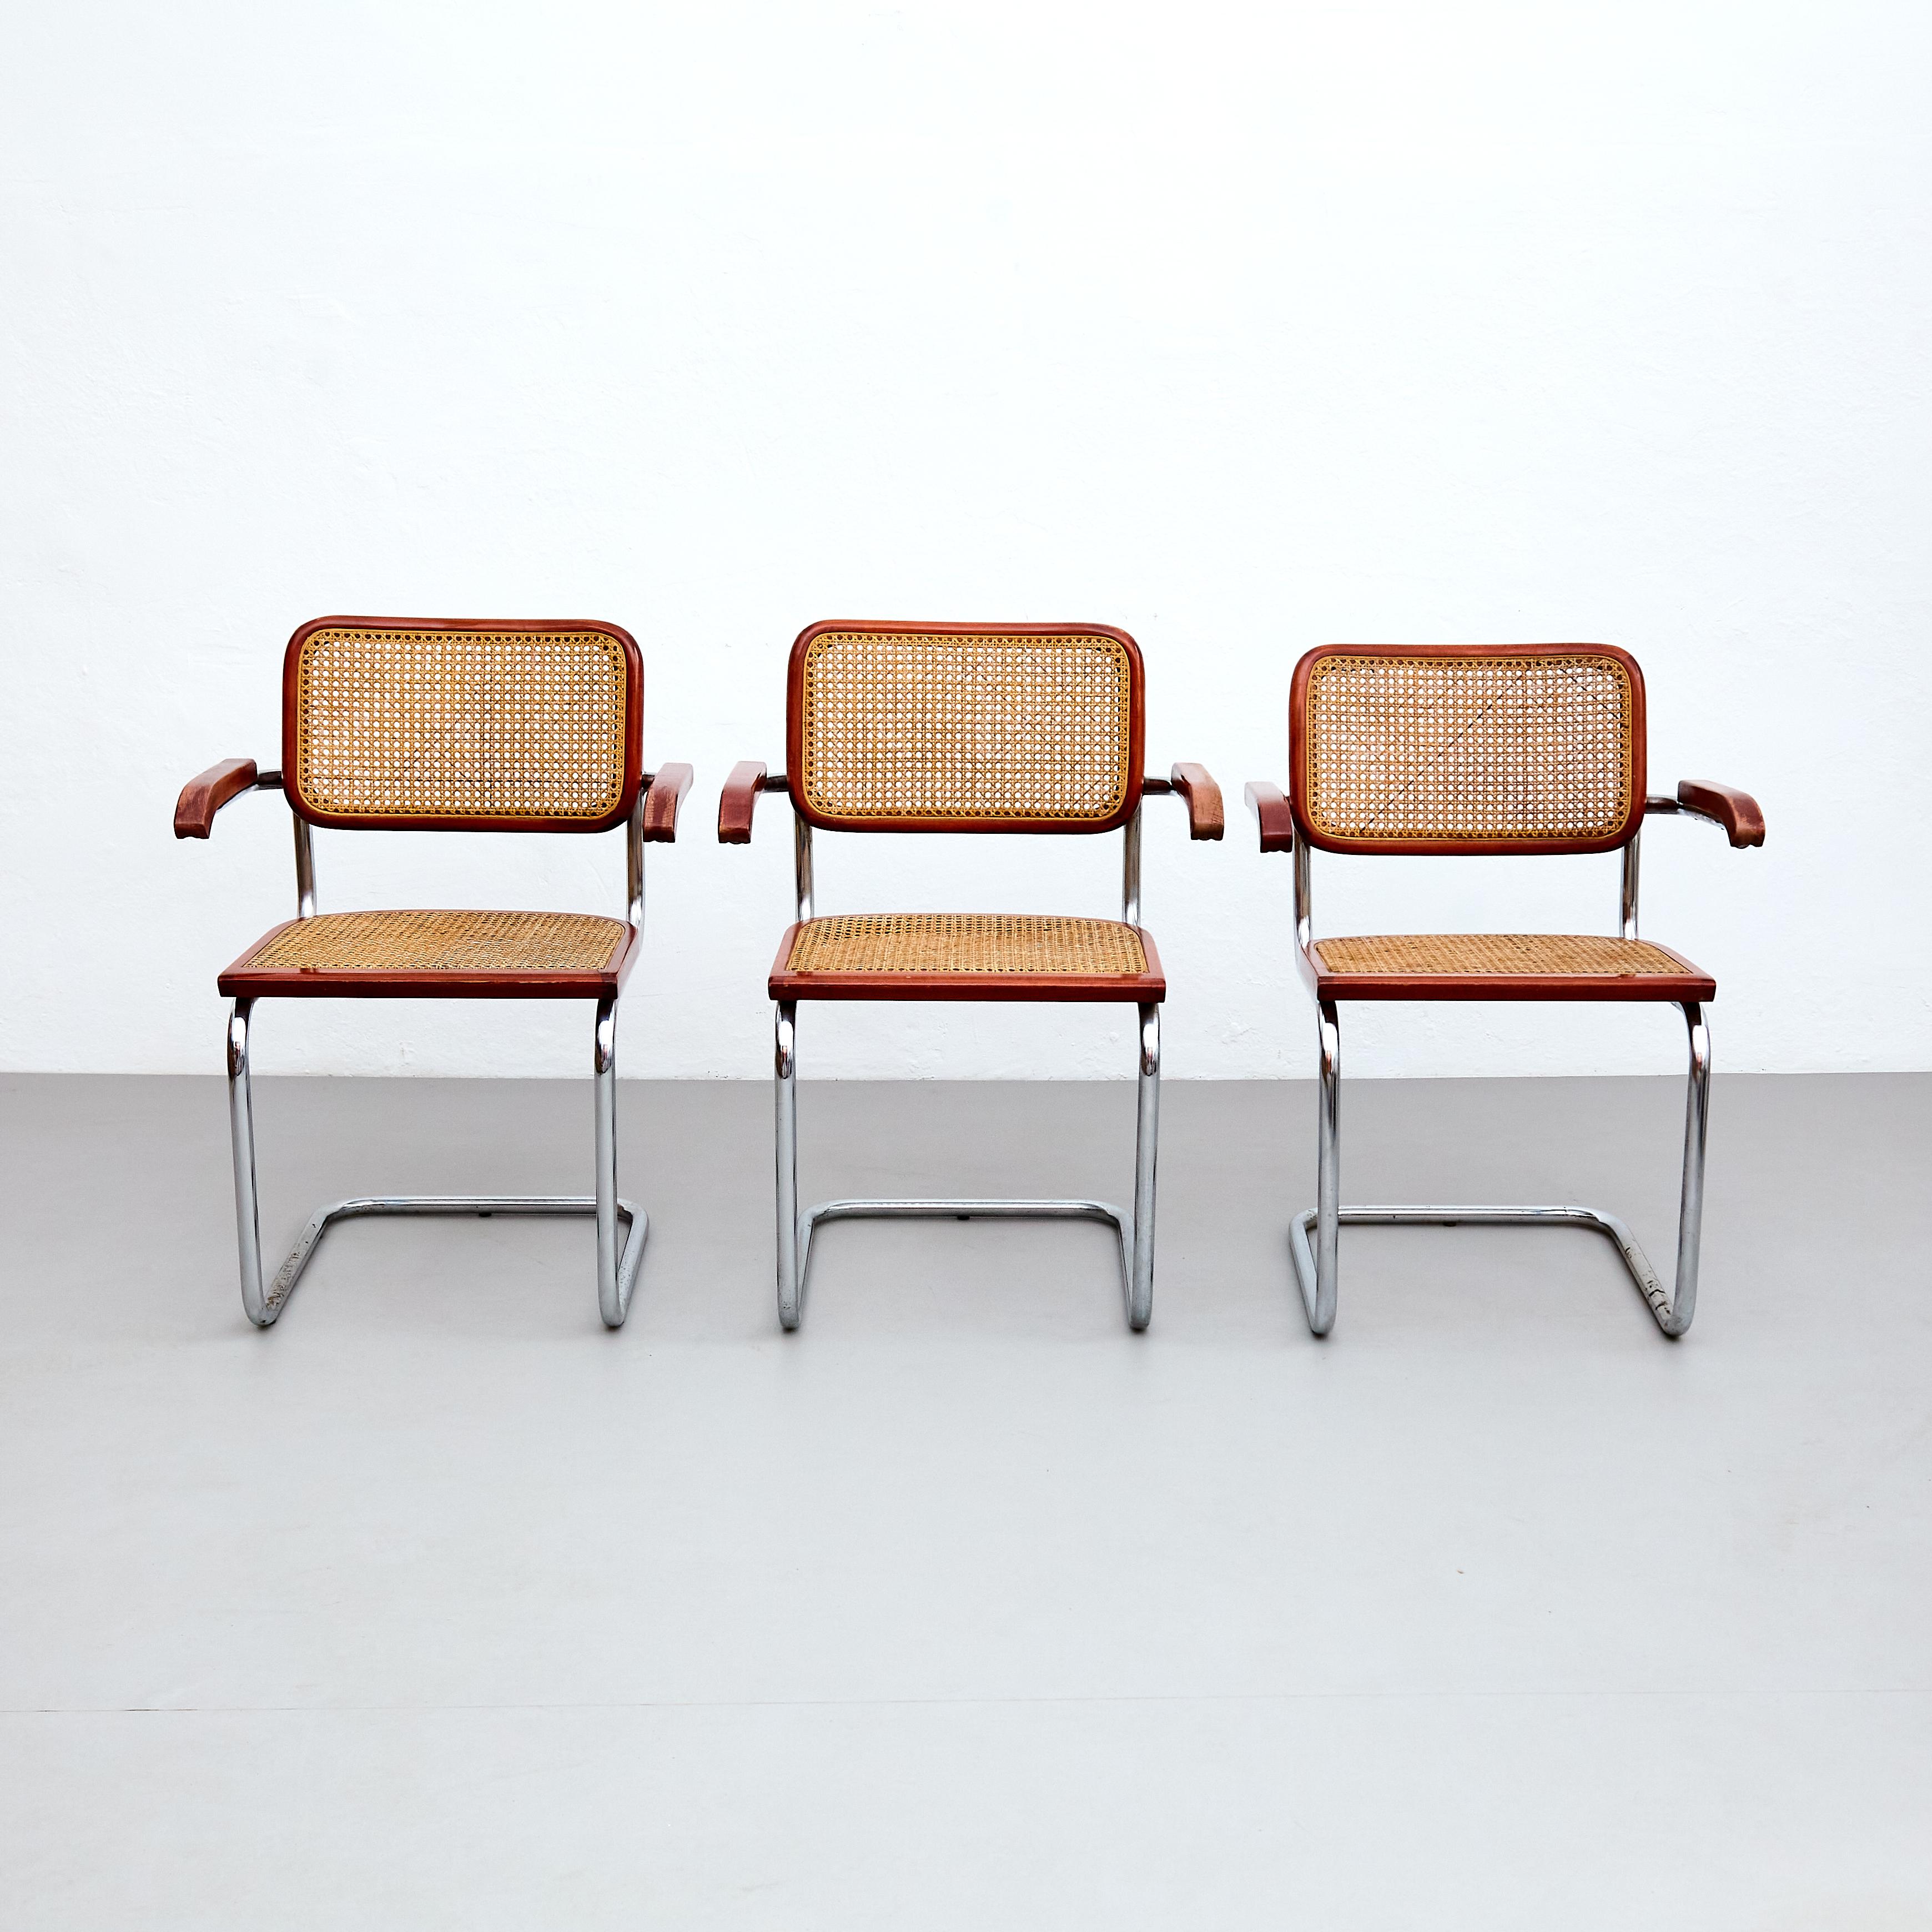 Set of 6 Cesca Chairs by Marcel Breuer, Mid-Century Modern Metal & Wood Classic In Good Condition For Sale In Barcelona, Barcelona